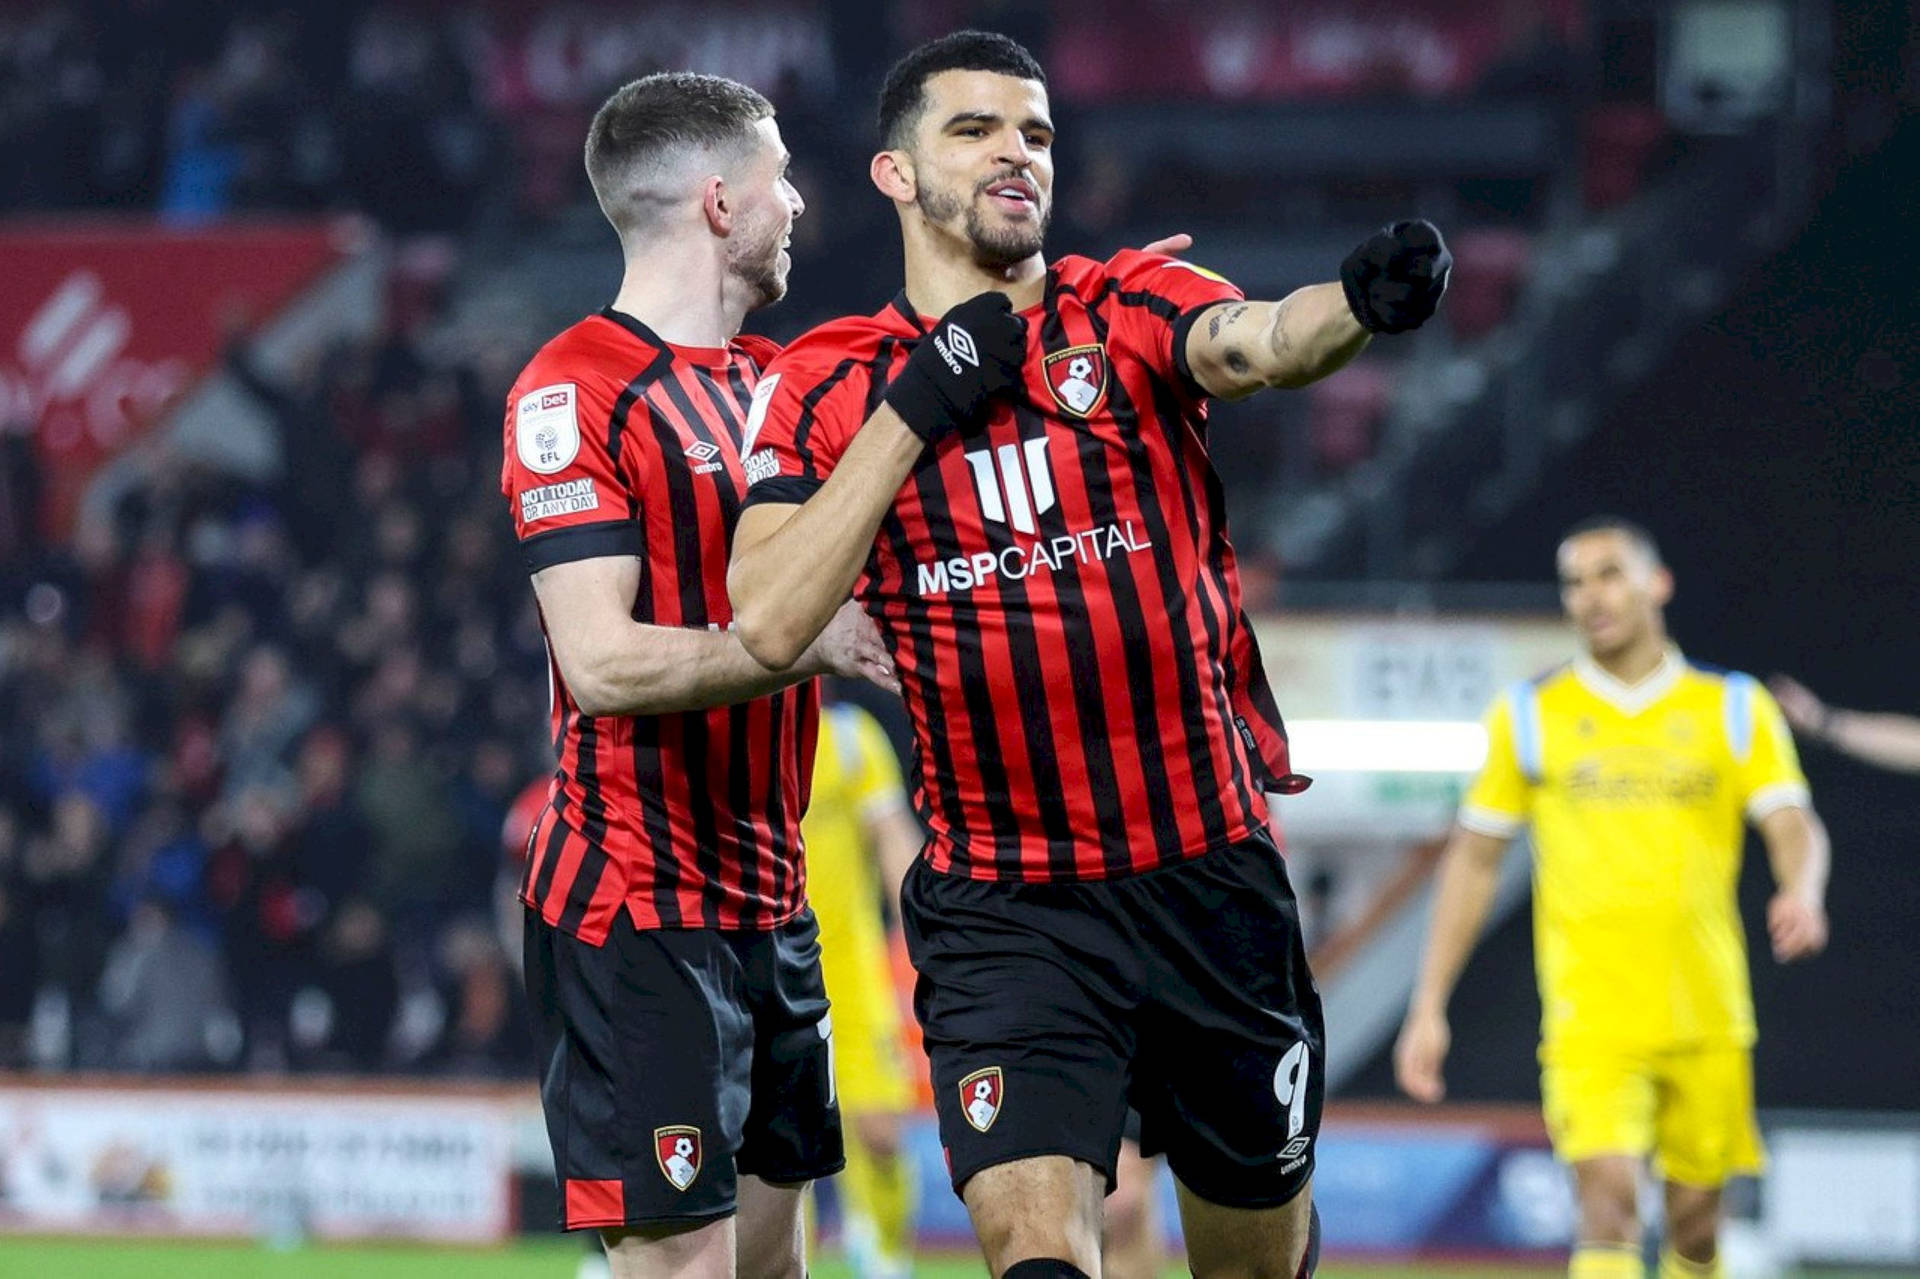 Two AFC Bournemouth Players On Field Wallpaper